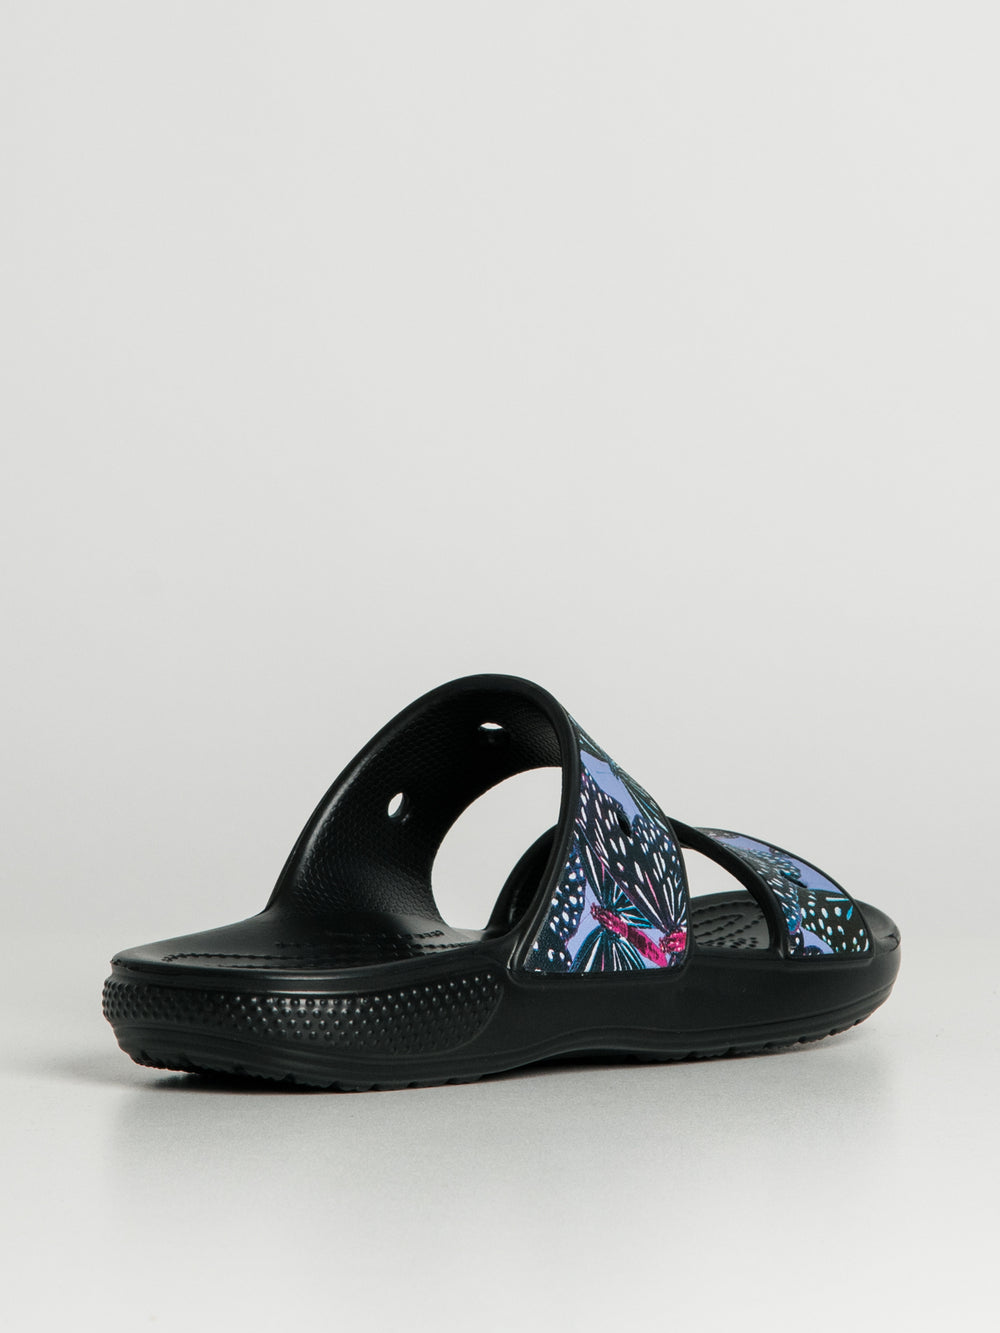 WOMENS CROCS CLASSIC BUTTERFLY SANDAL - CLEARANCE